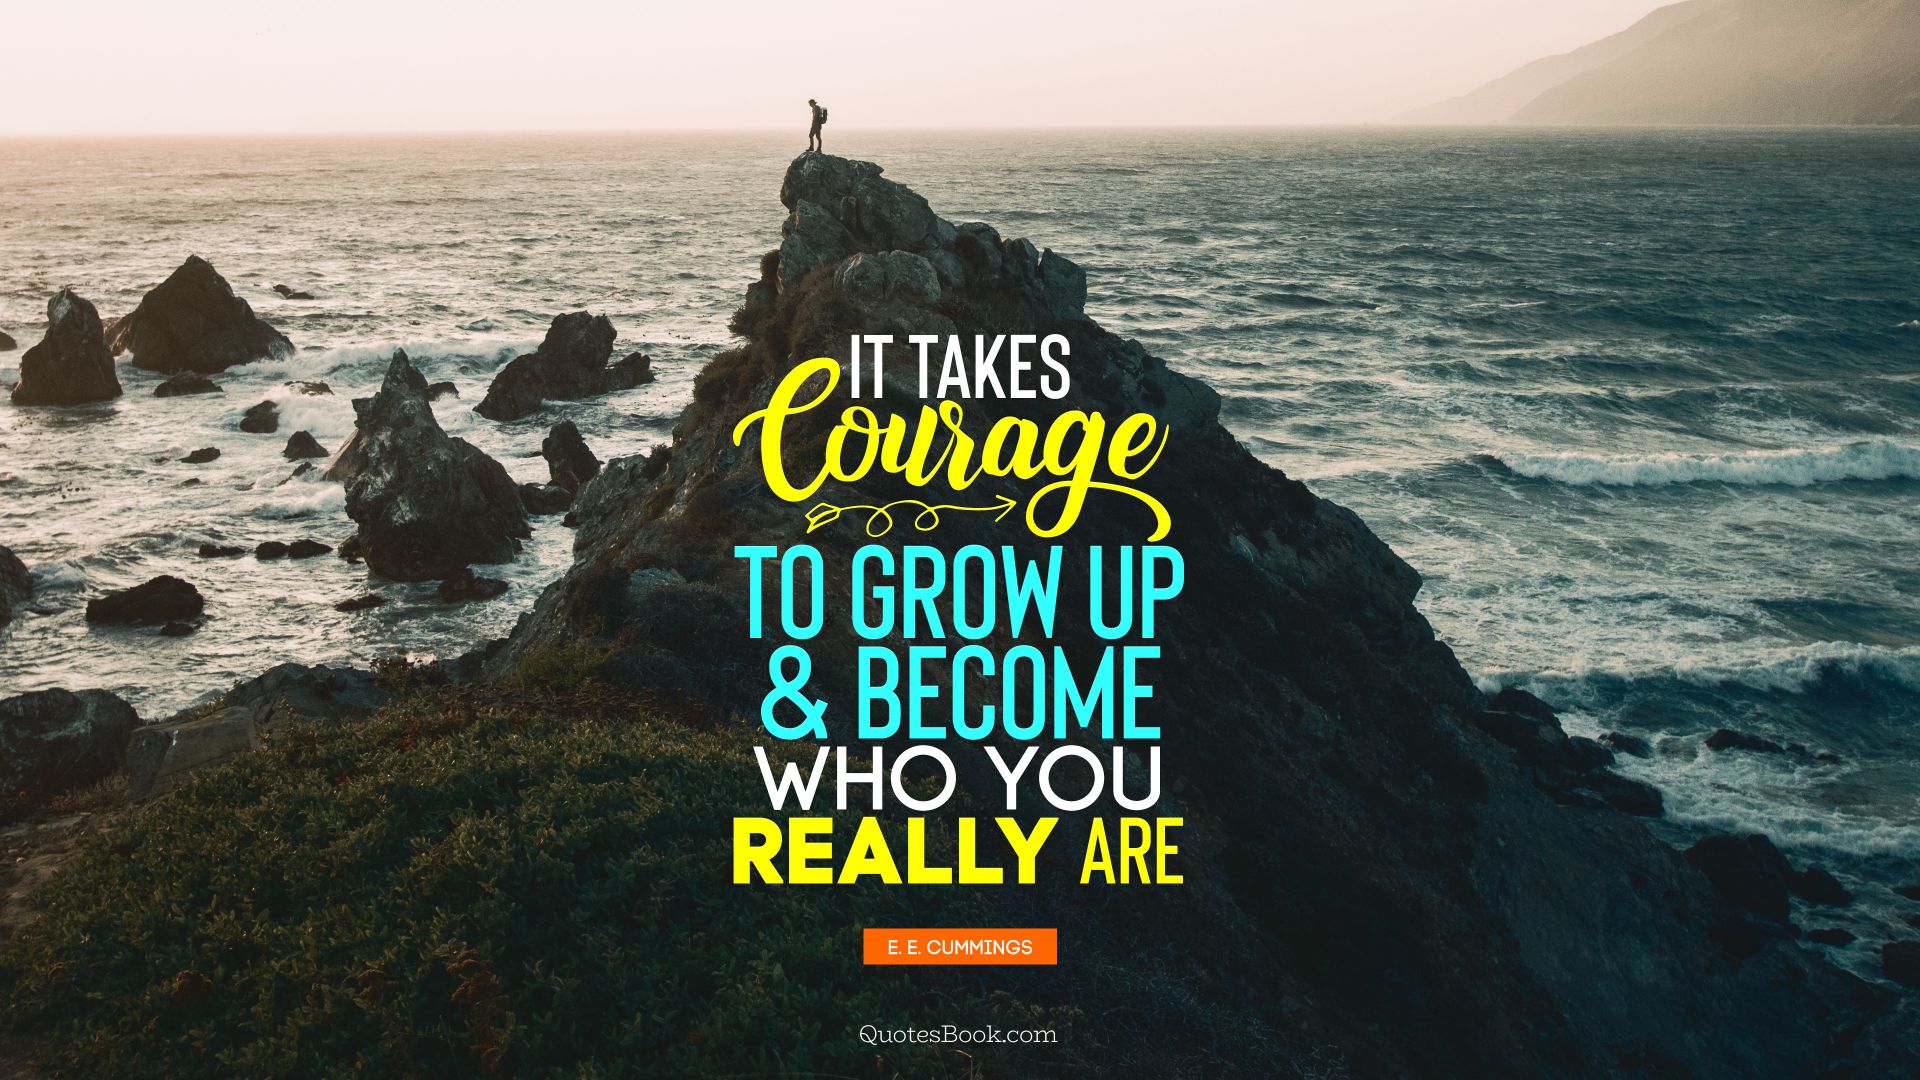 It takes courage to grow up and become who you really are. - Quote by E. E. Cummings